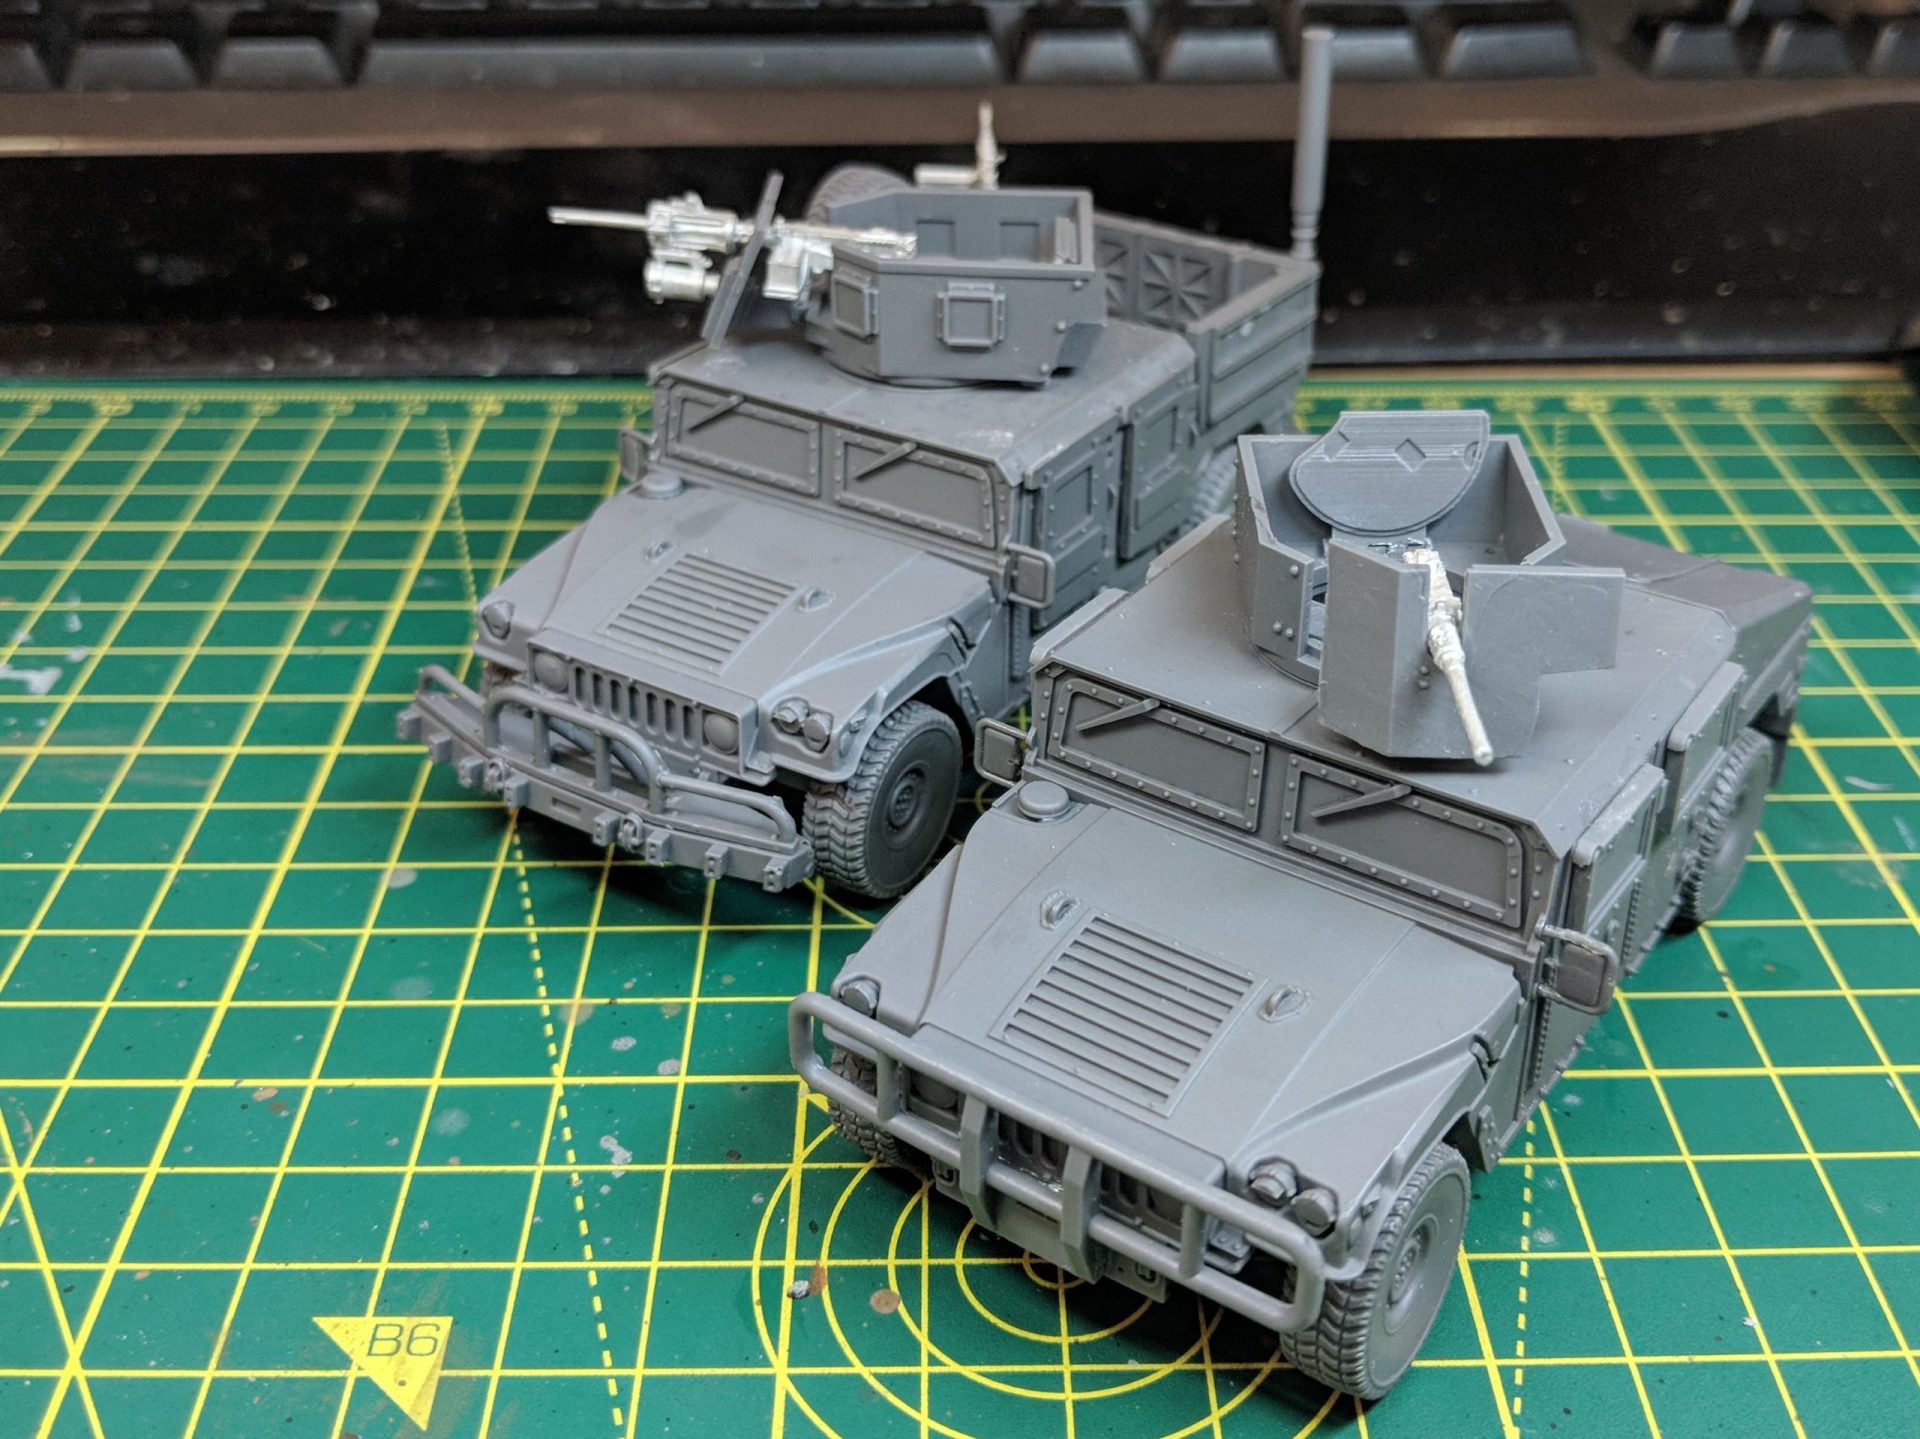 Project Humvee – Initial Impressions